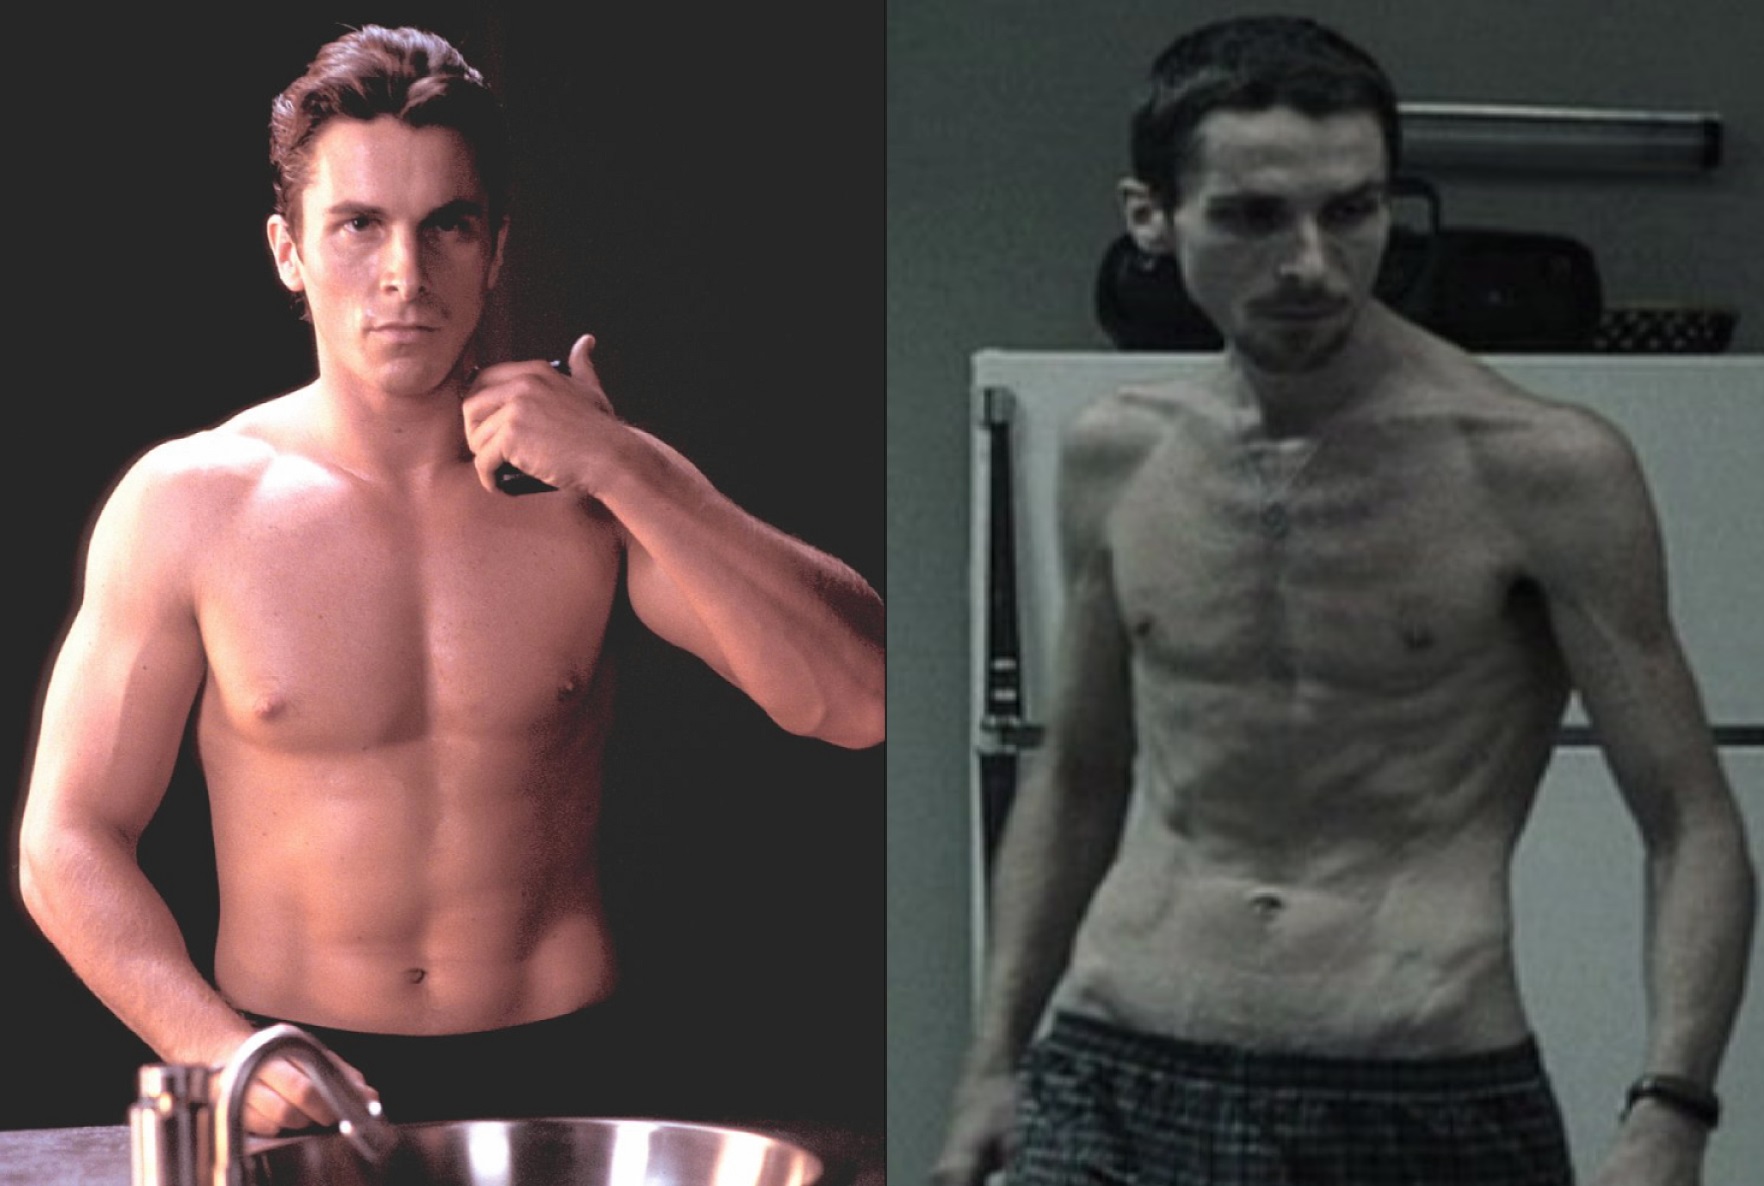 Christian Bale lost about 70lbs in 3 months for the Machinist